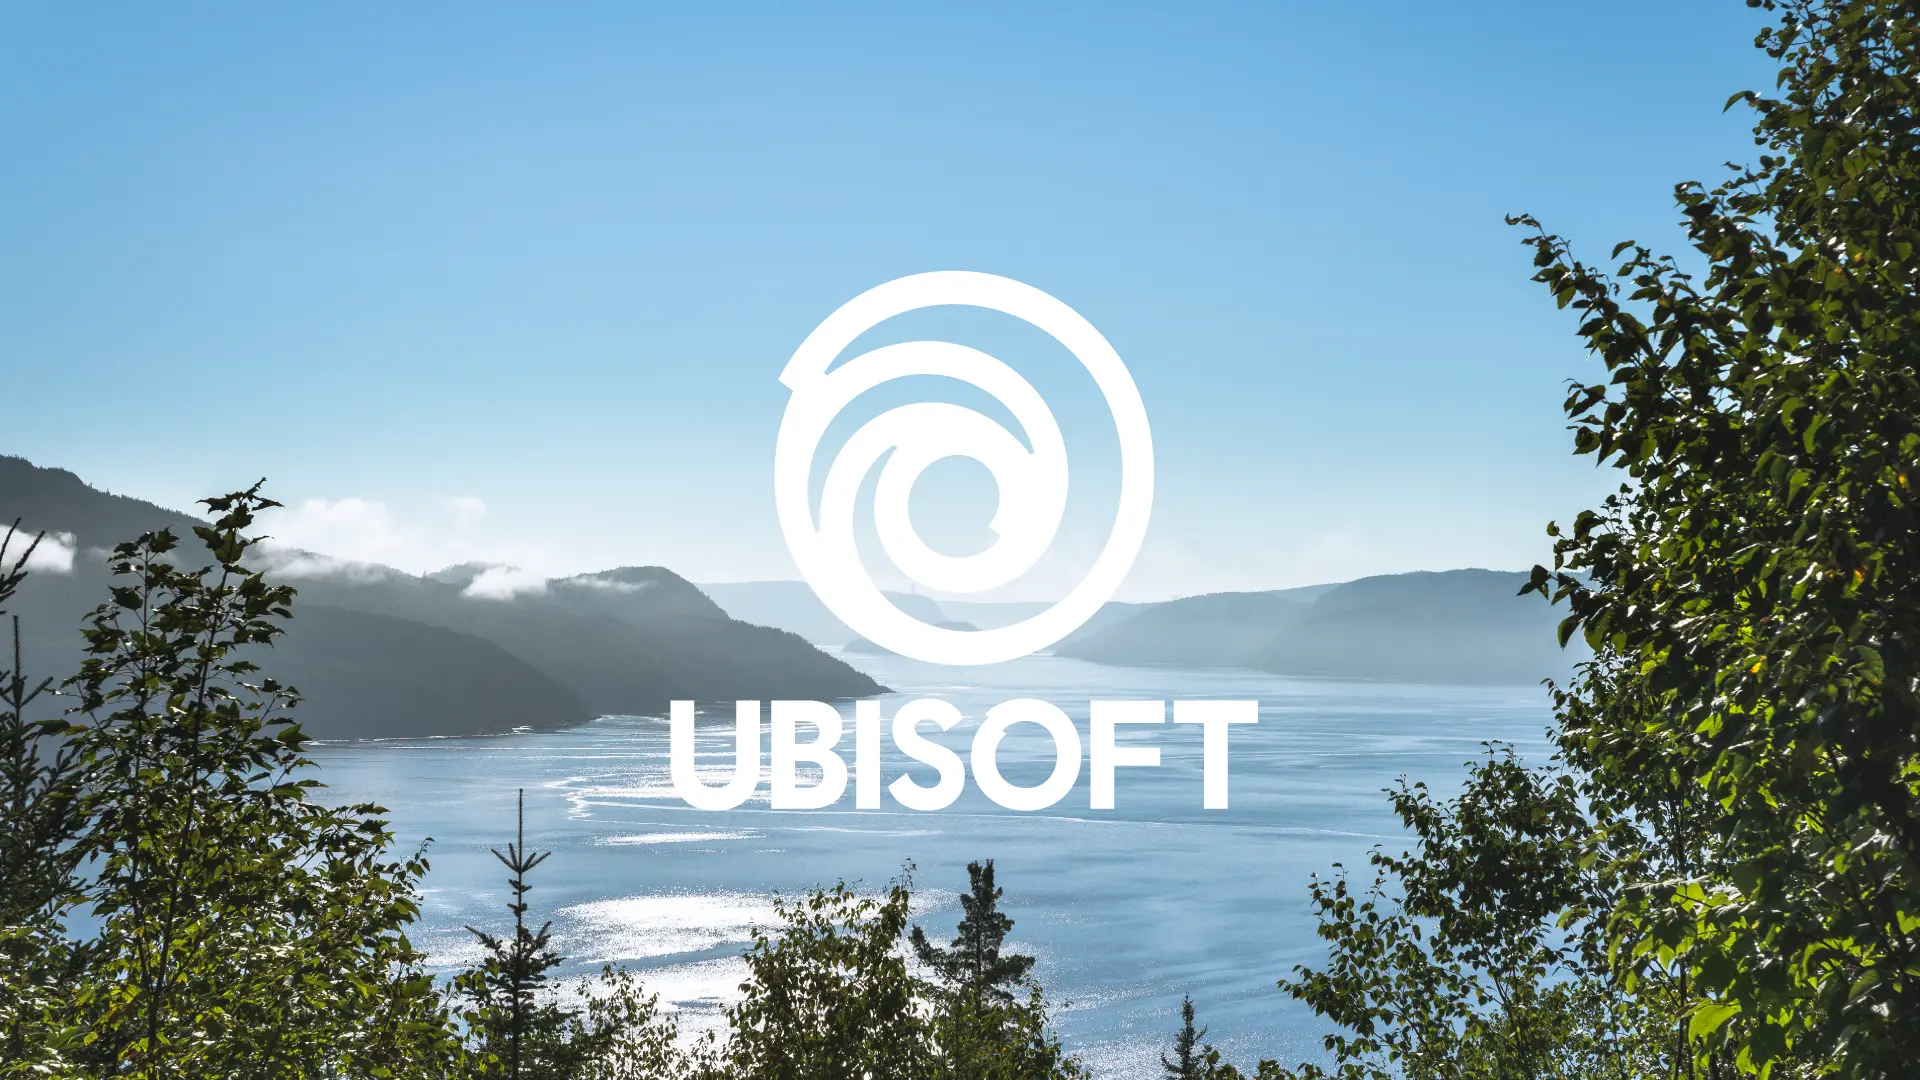 Ubisoft – Titles purchased on Stadia can be redeemed for free on PC